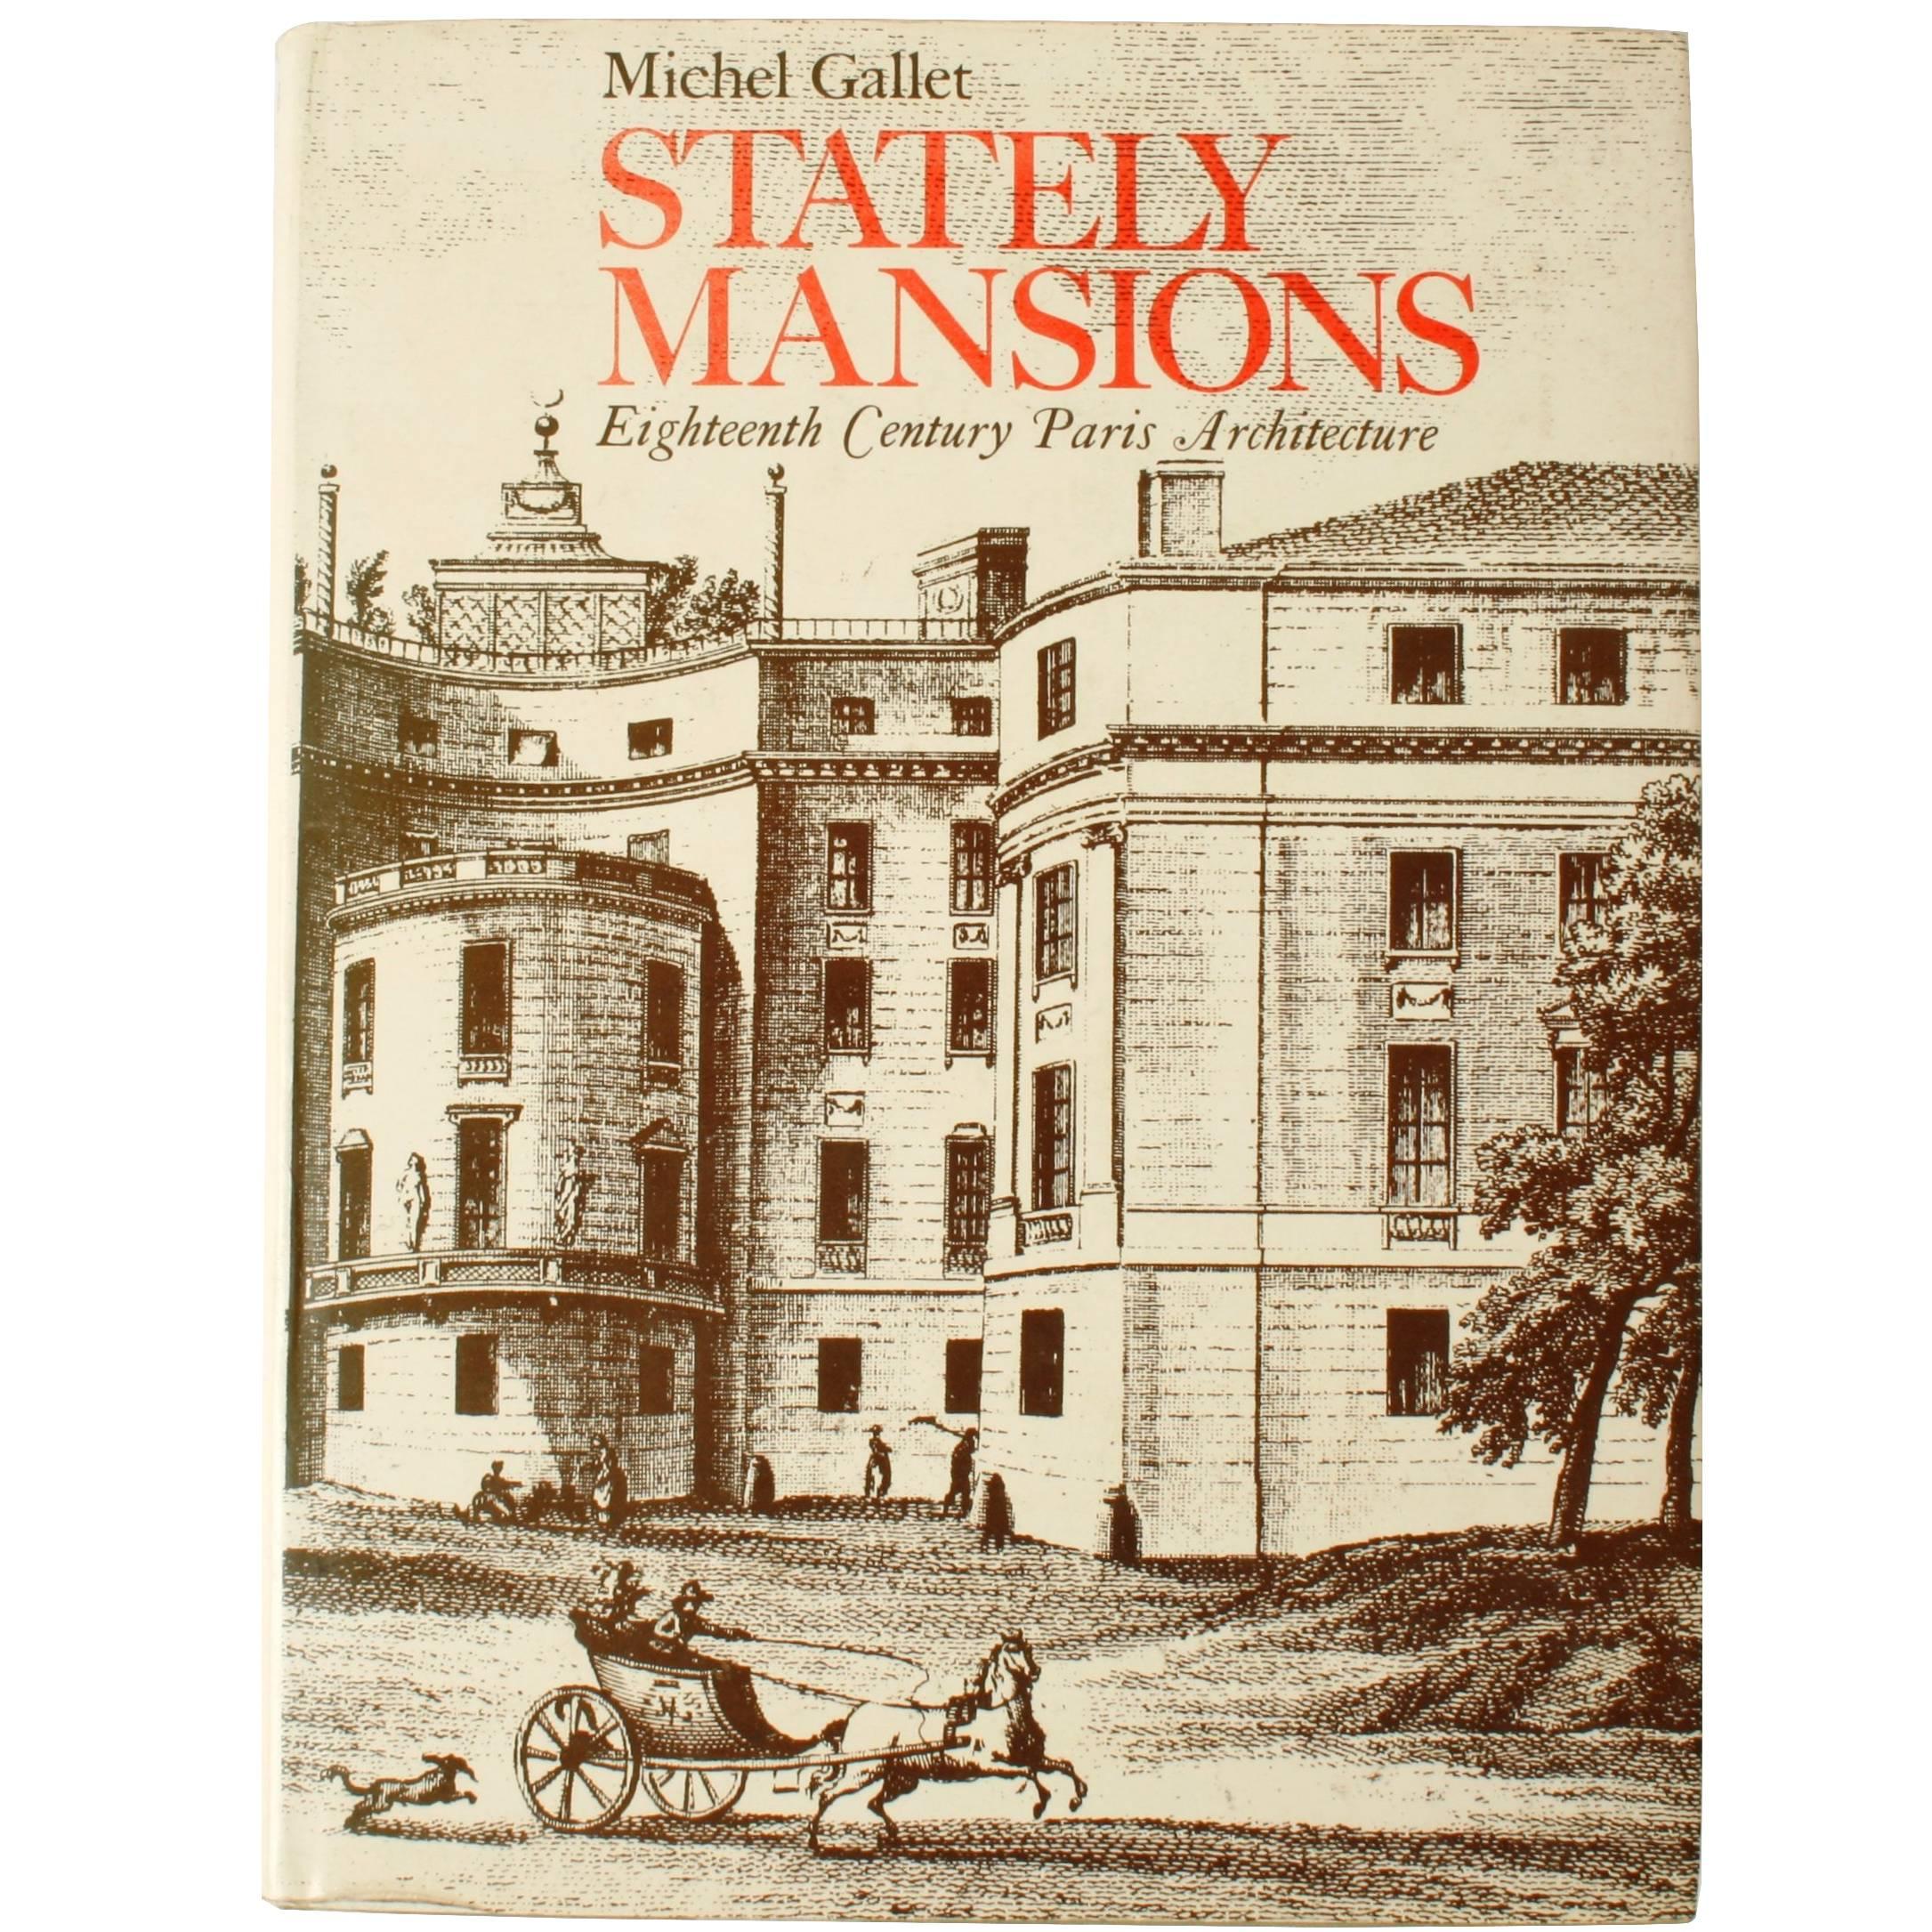 Stately Mansions, 18th Century Paris Architecture, First Edition